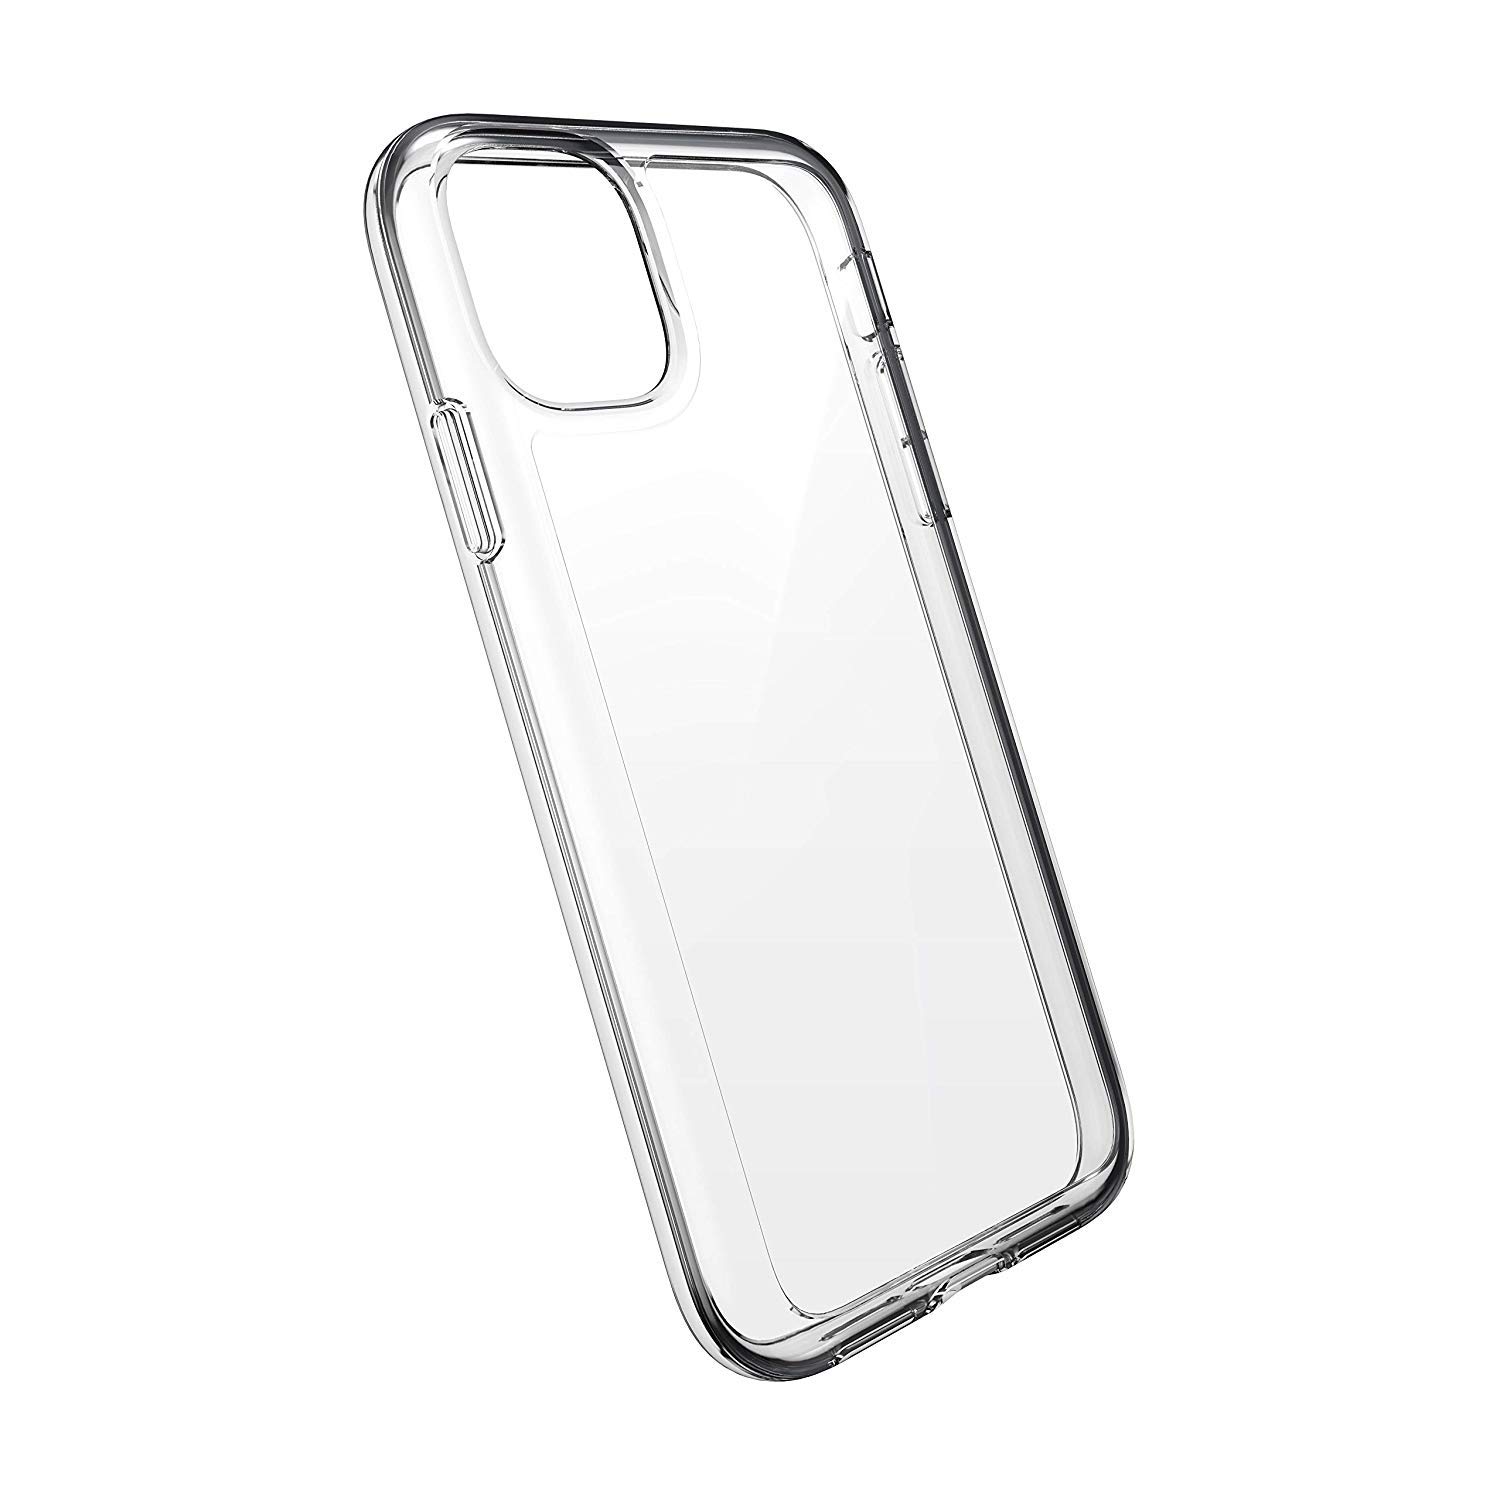 Speck's clear Gemshell case for the iPhone 11